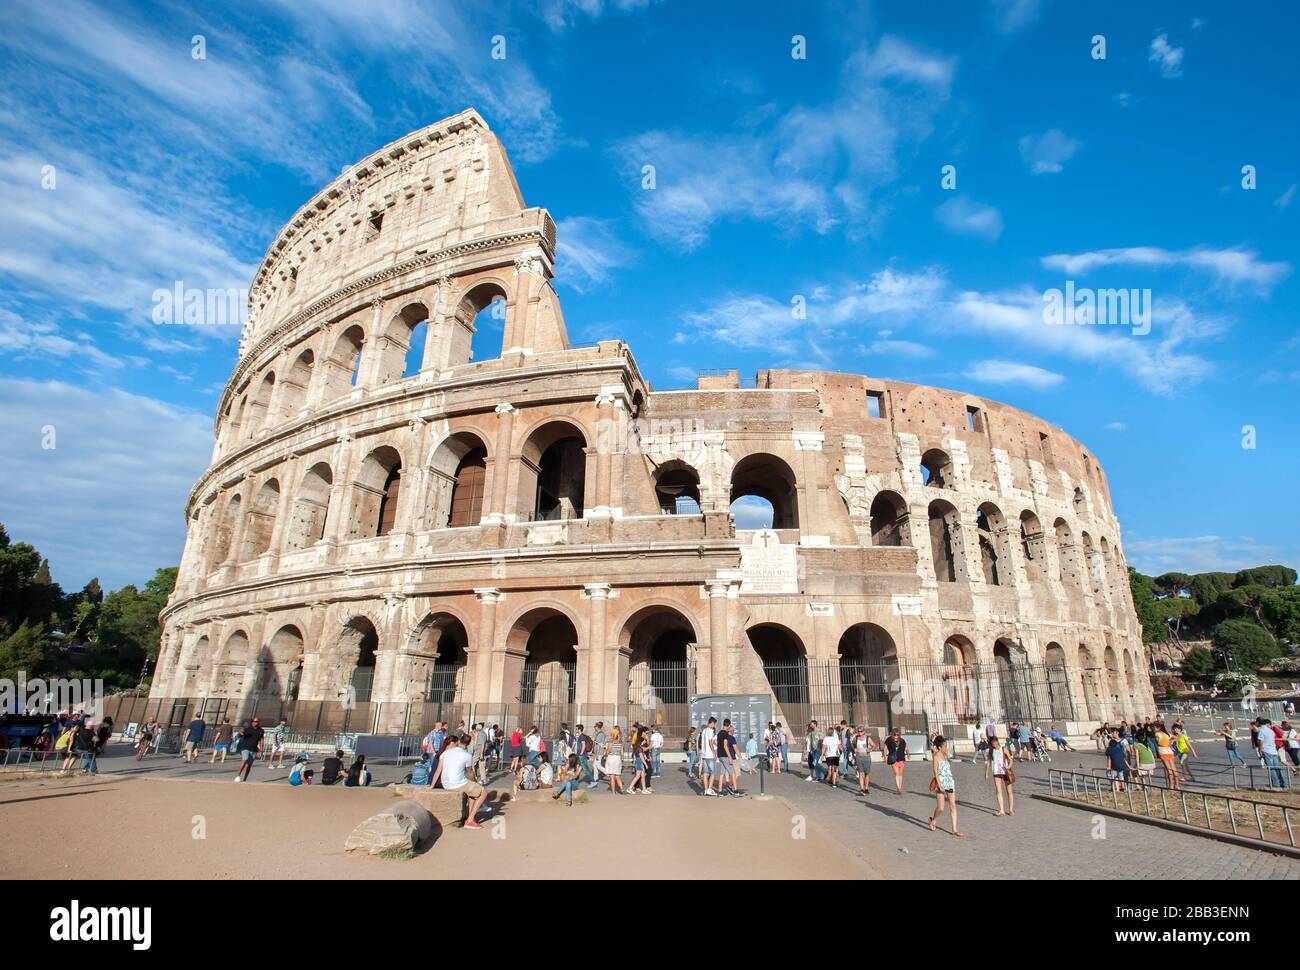 Tourists mill around outside the Colosseum in Rome Stock Photo